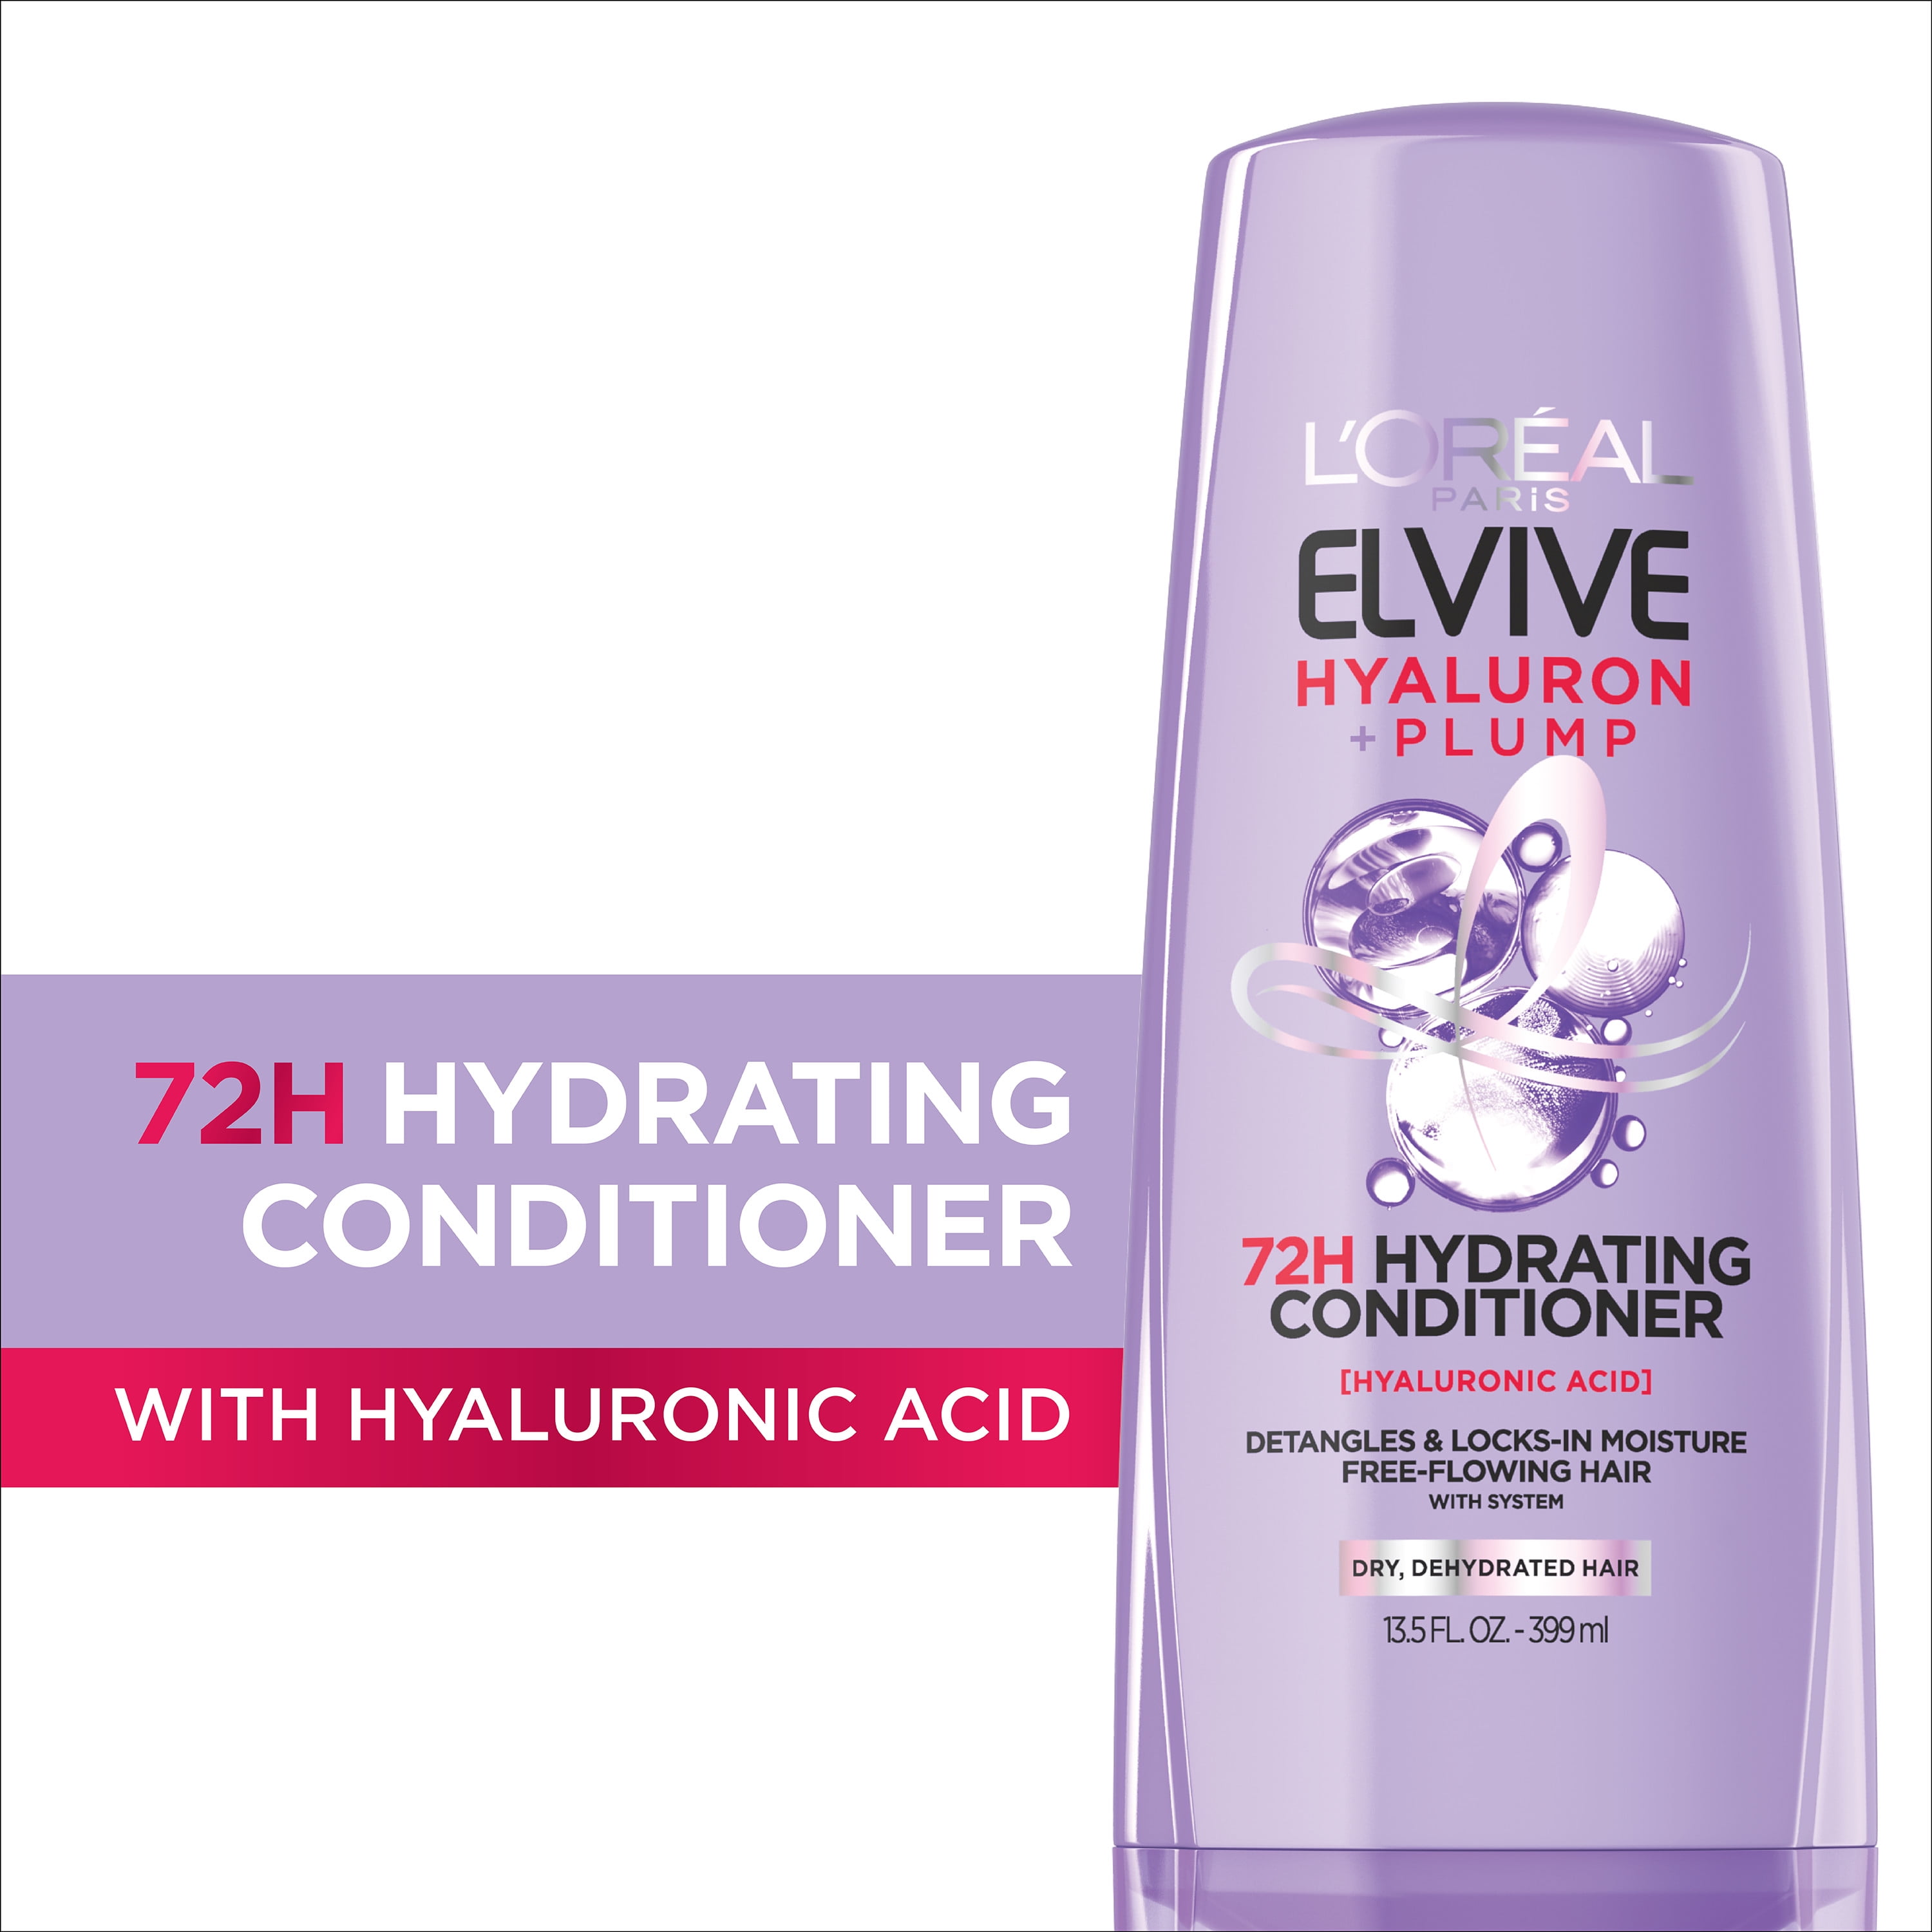 Loreal Elvive Hyaluron Plump 72h Hydrating Conditioner With Hyaluronic